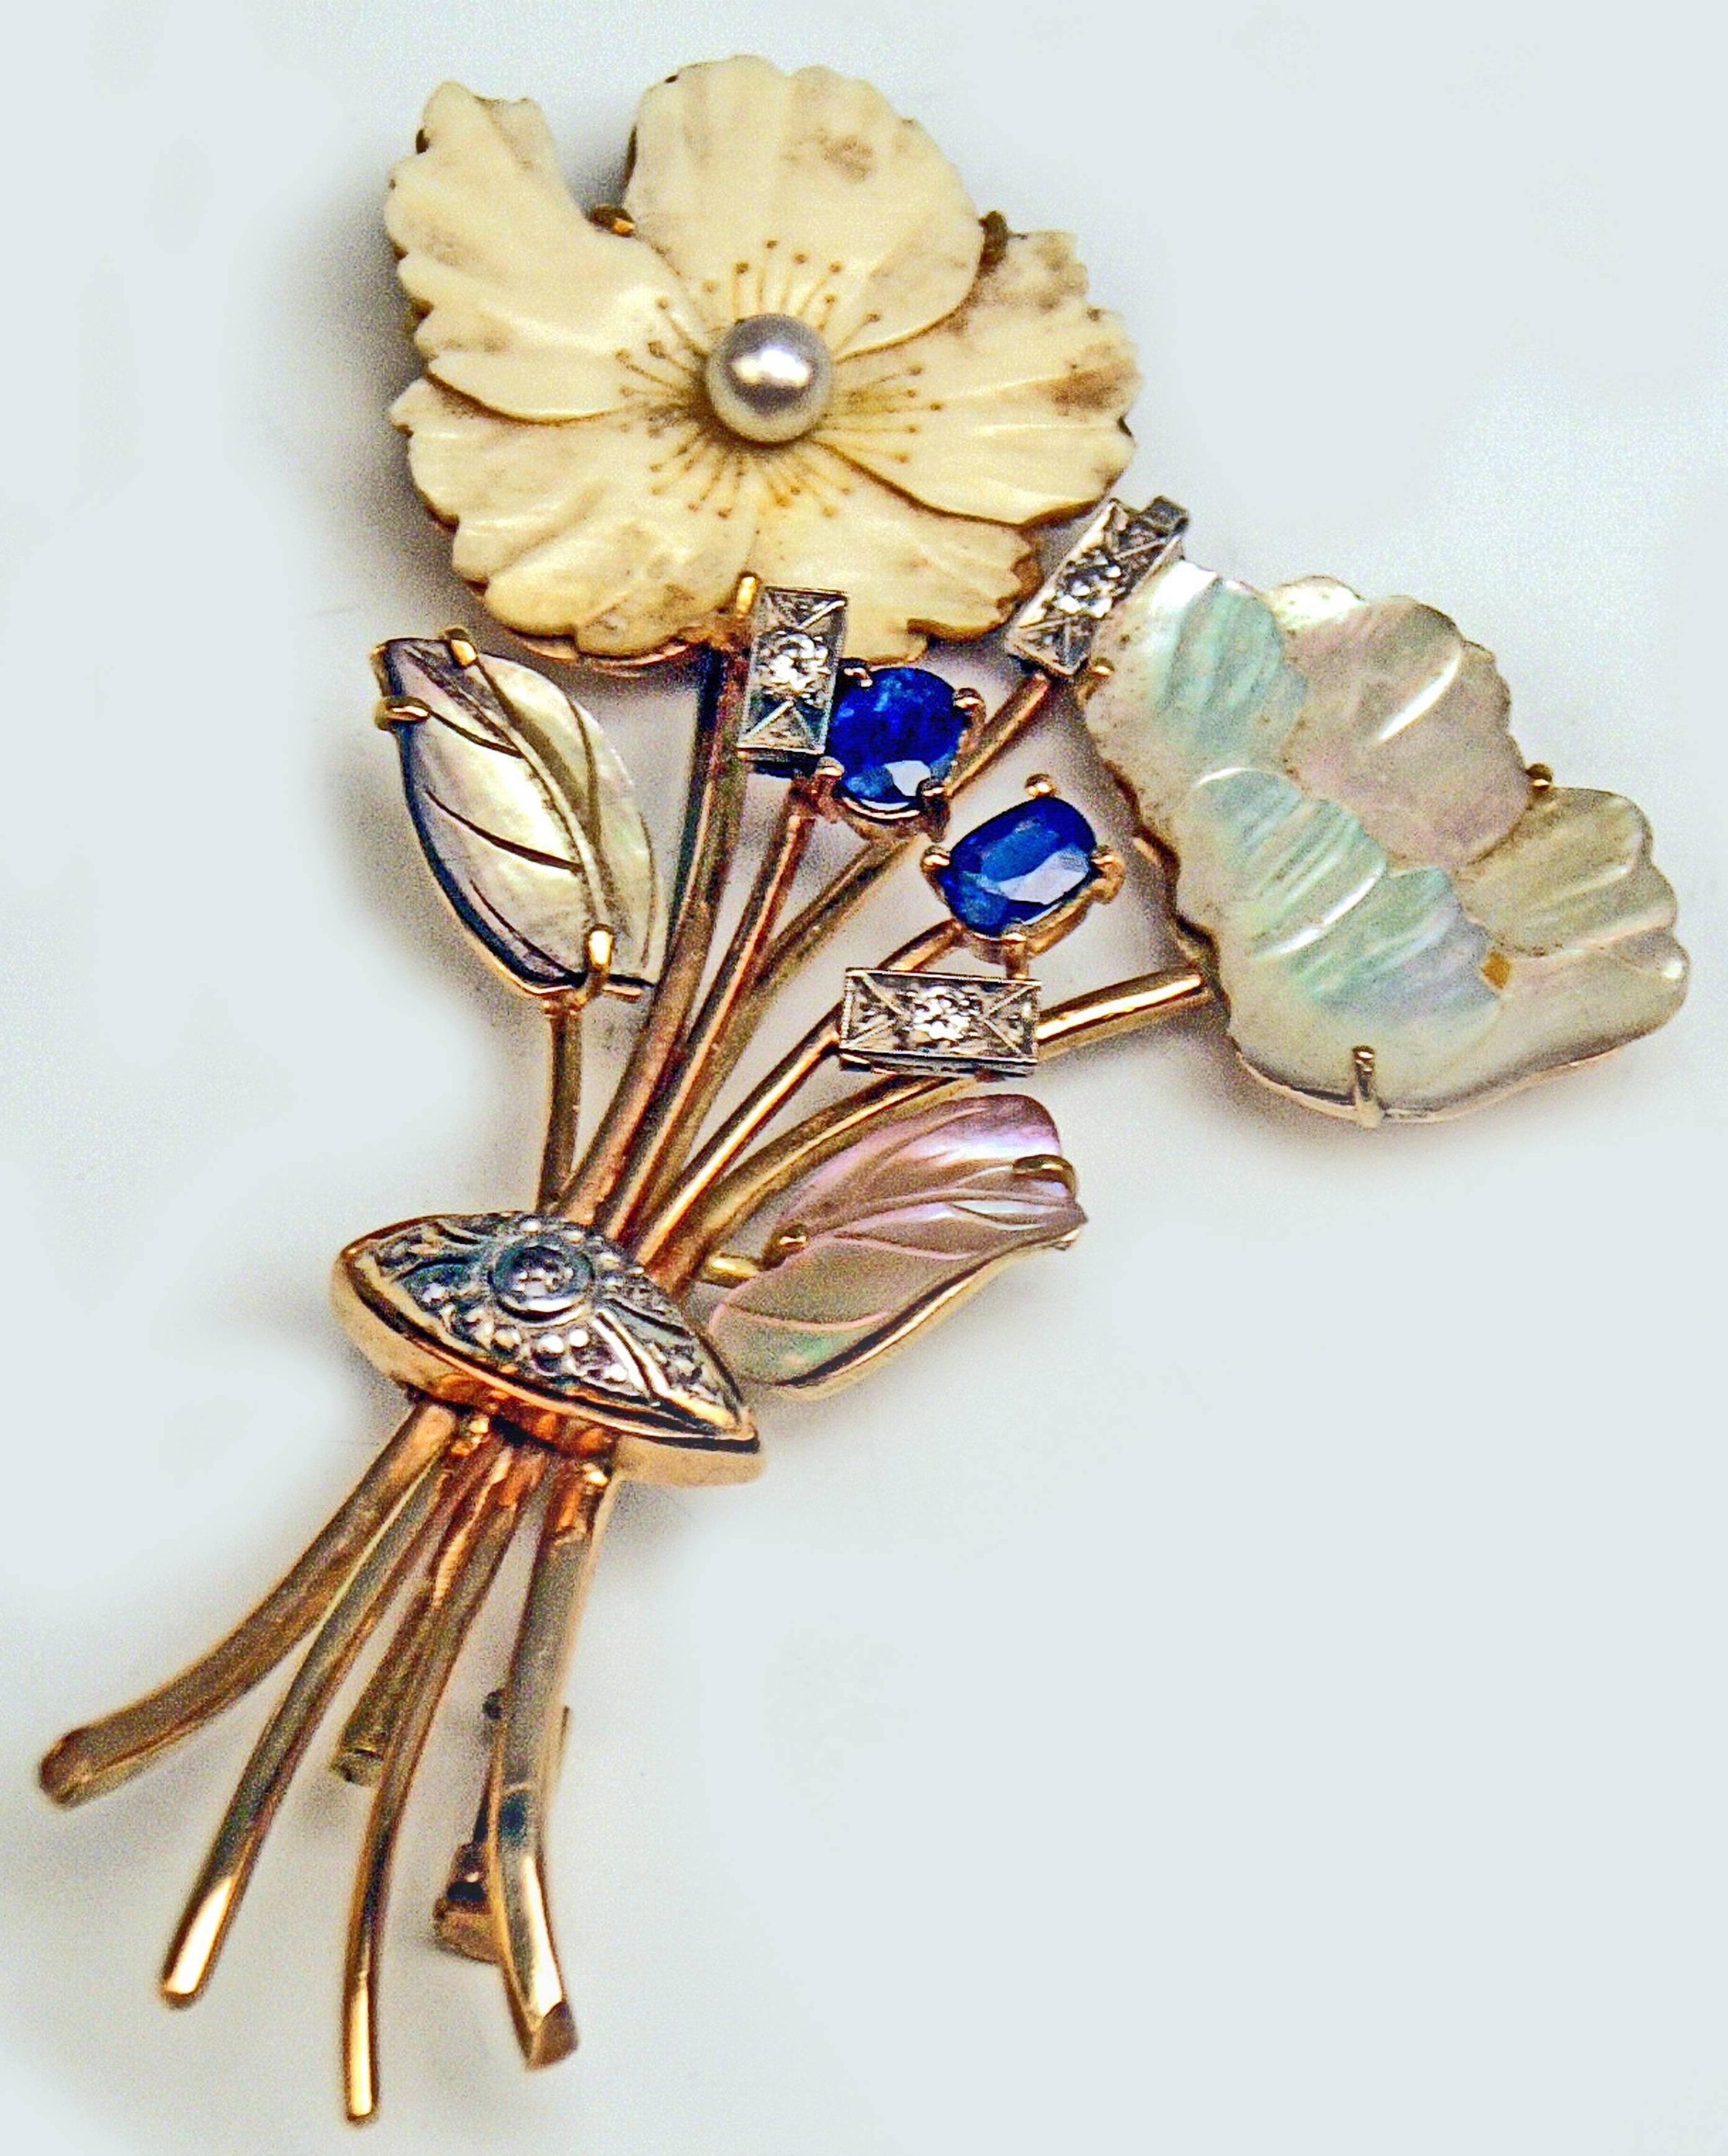 GOLDEN BROOCH VINTAGE (MADE CIRCA 1900) SHAPED AS FLOWER BOUQUET, WITH VARIOUS GEMS:
GOLD (14 ct / 585)     COVERED WITH BRILLIANTS (VINTAGE CUT / 0.30 ct), TWO SAPPHIRES AND ONE PEARL.
WEIGHT:  20.0 GRAMS  (= 0.70 OZ / 0.64 TROY OUNCES)
THE BROOCH